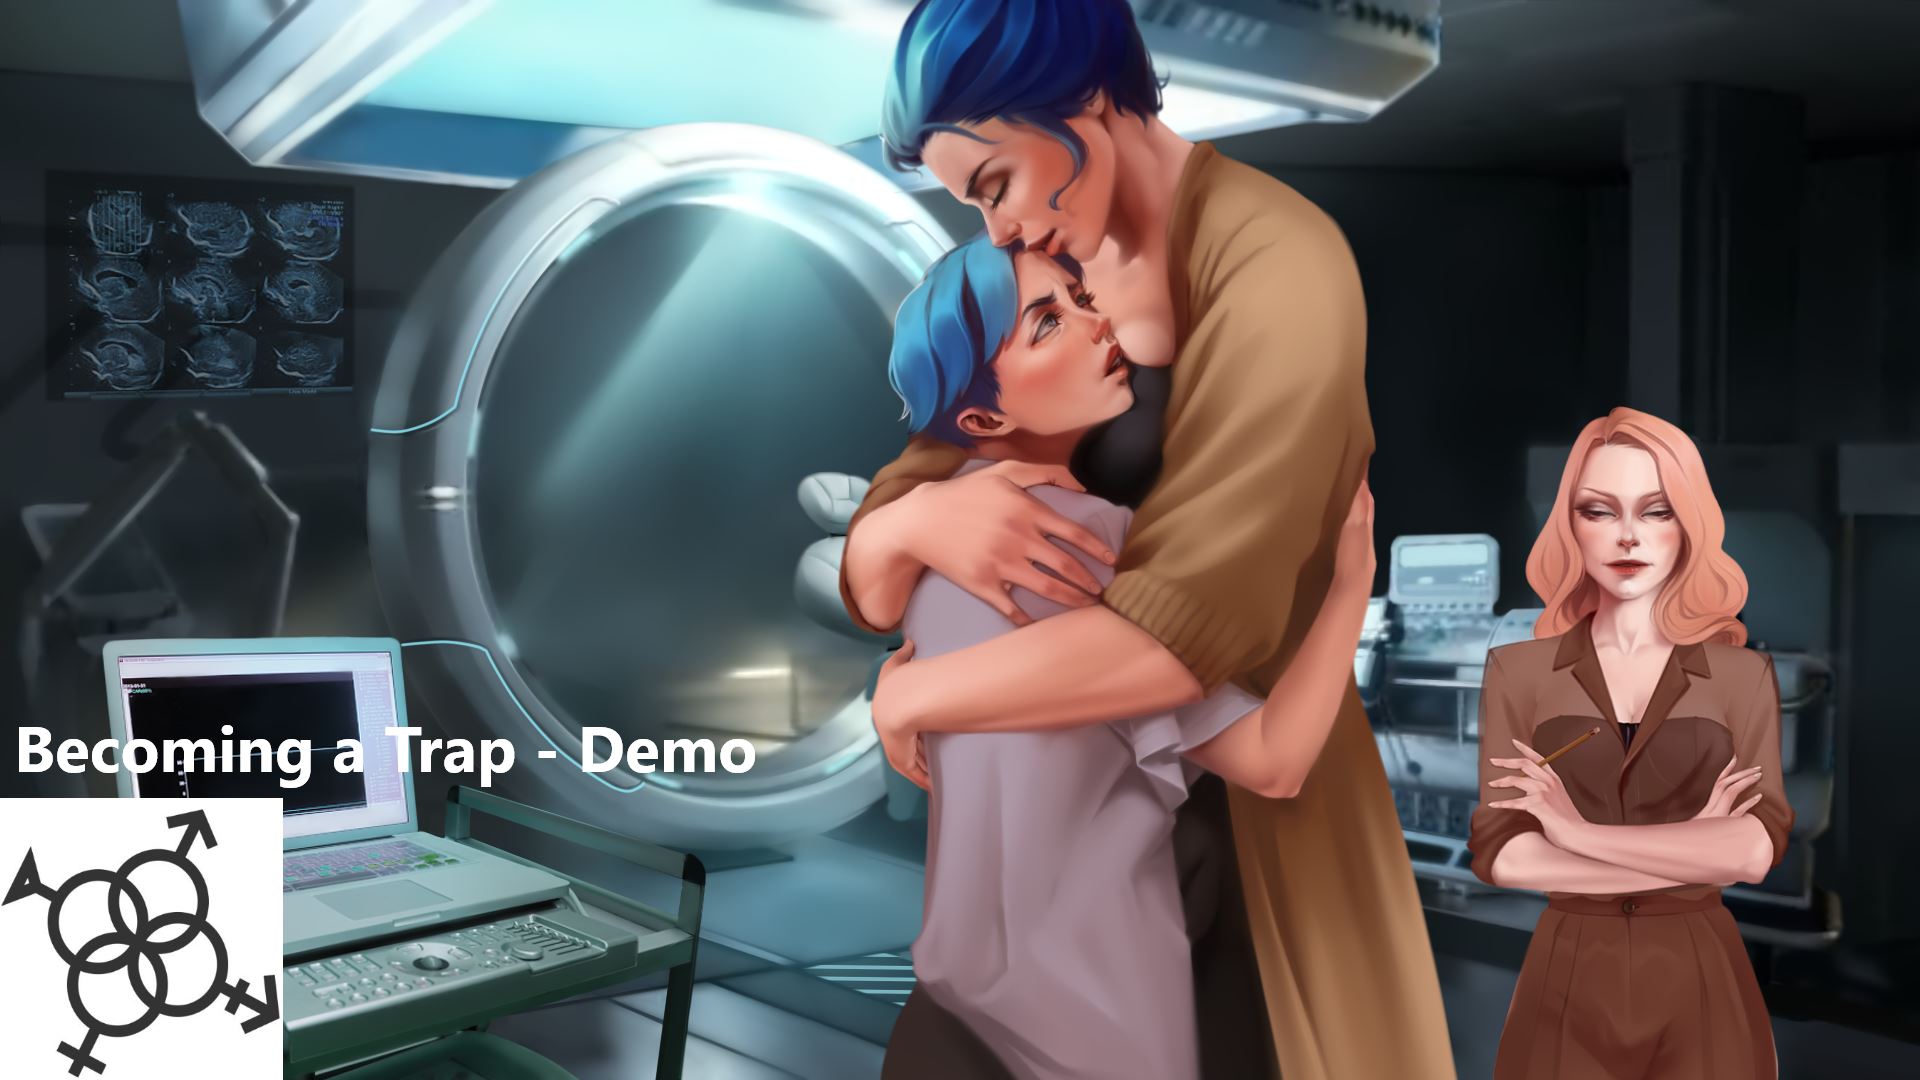 Becoming a trap porn game